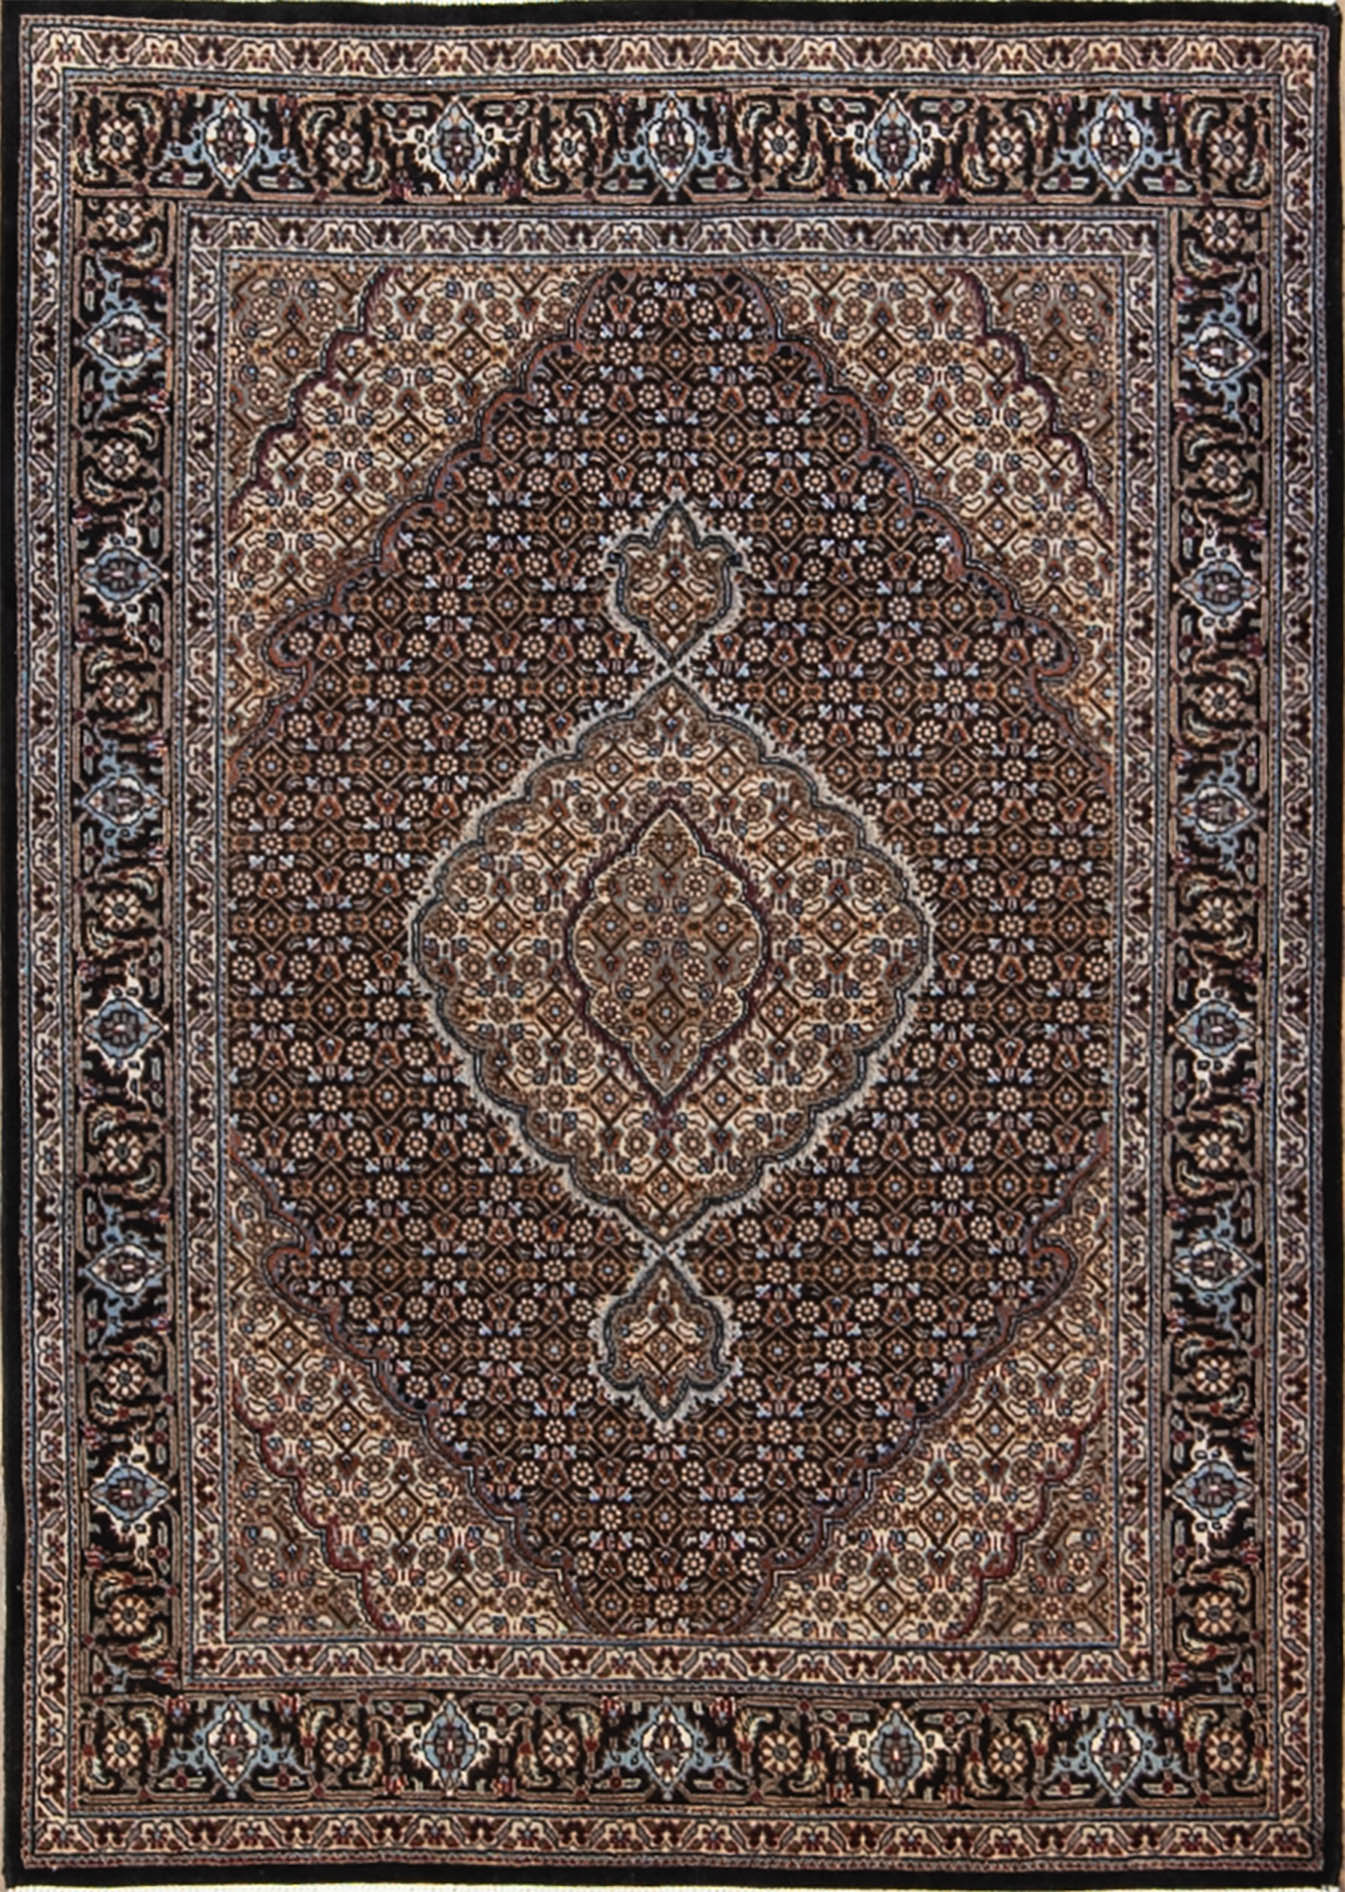 Hand knotted classic style Persian Tabriz carpet in black color made of wool and silk. Rug size 3.6x4.10.